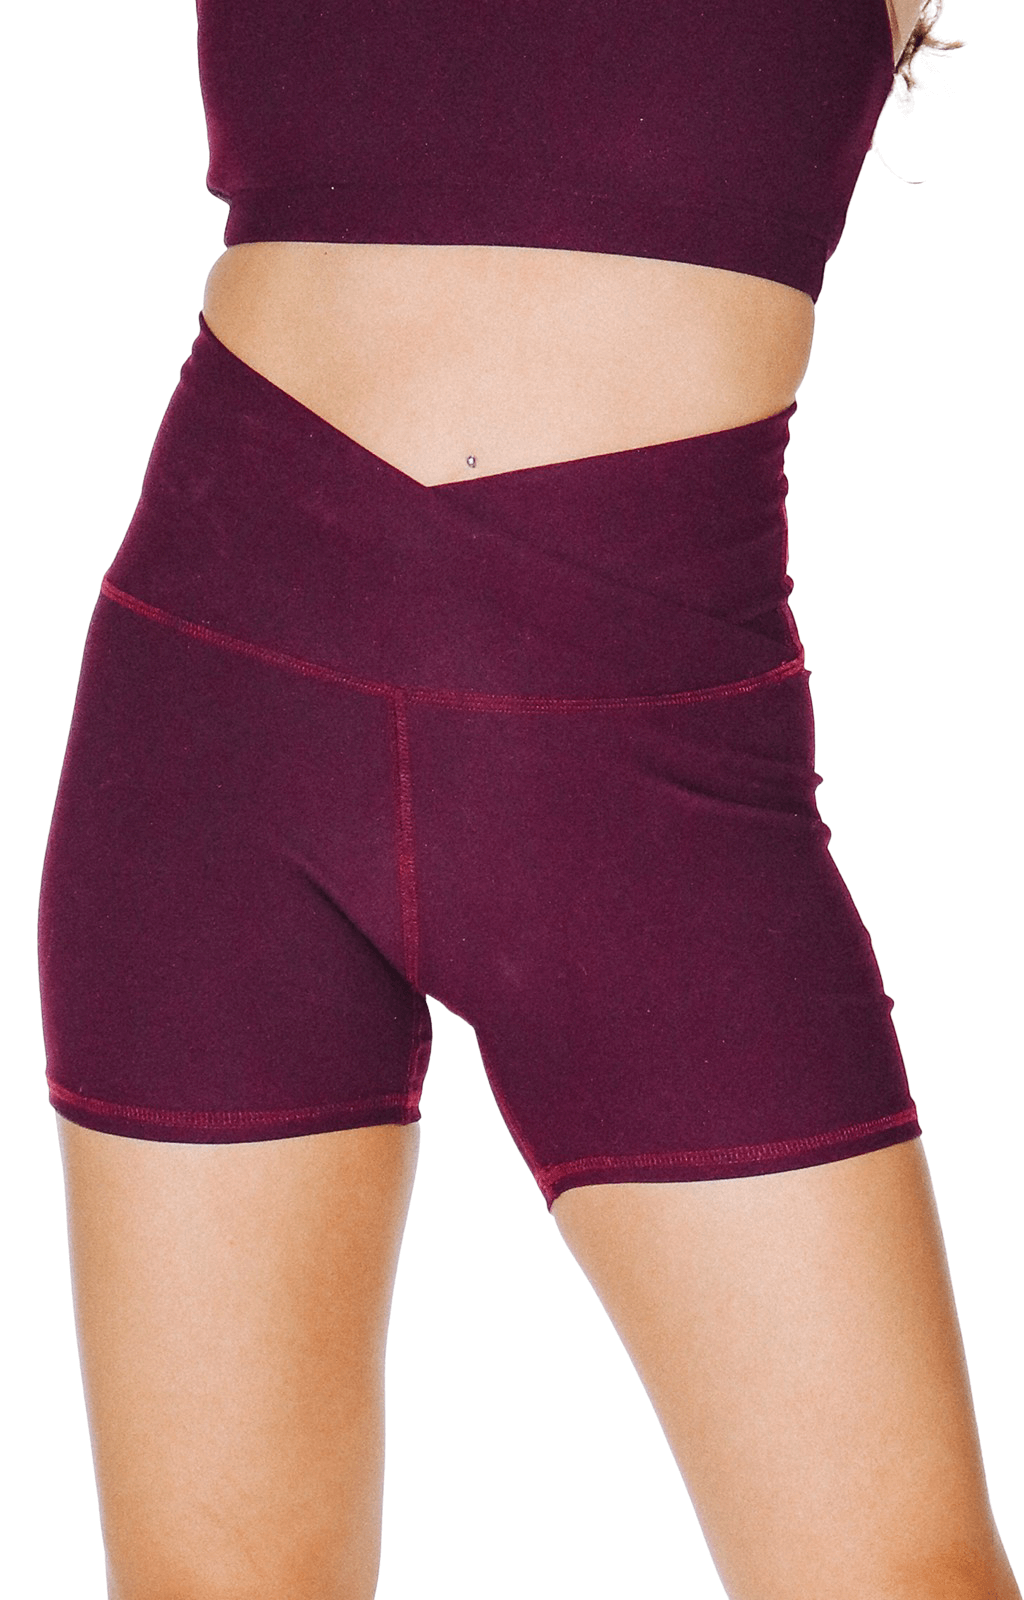 Movement Short in Maroon front